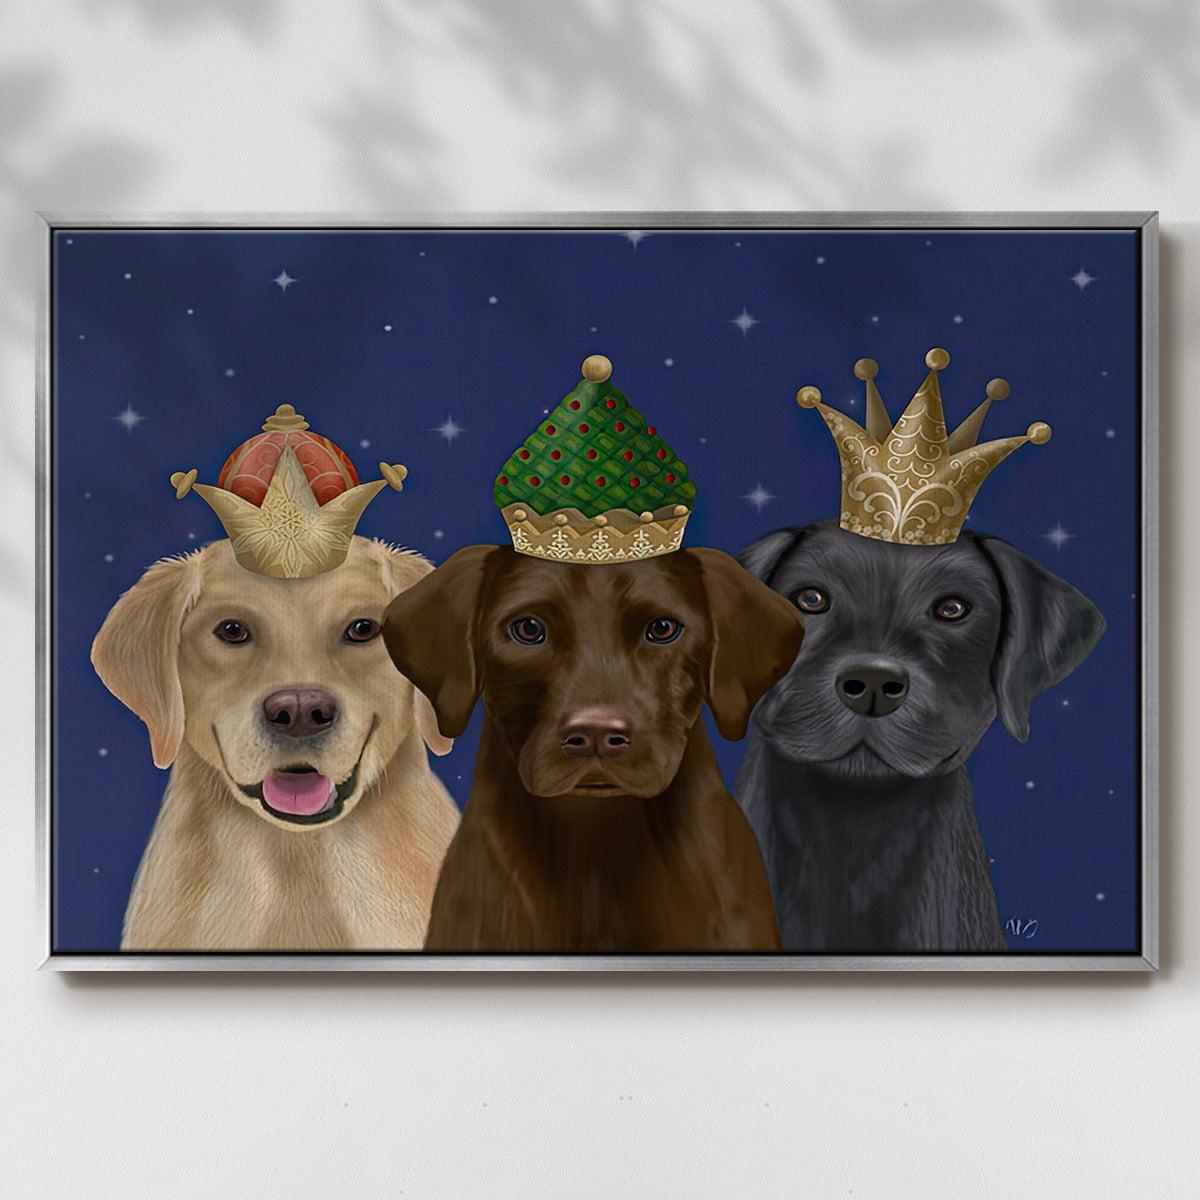 Christmas Labradors, Three Kings - Framed Gallery Wrapped Canvas in Floating Frame